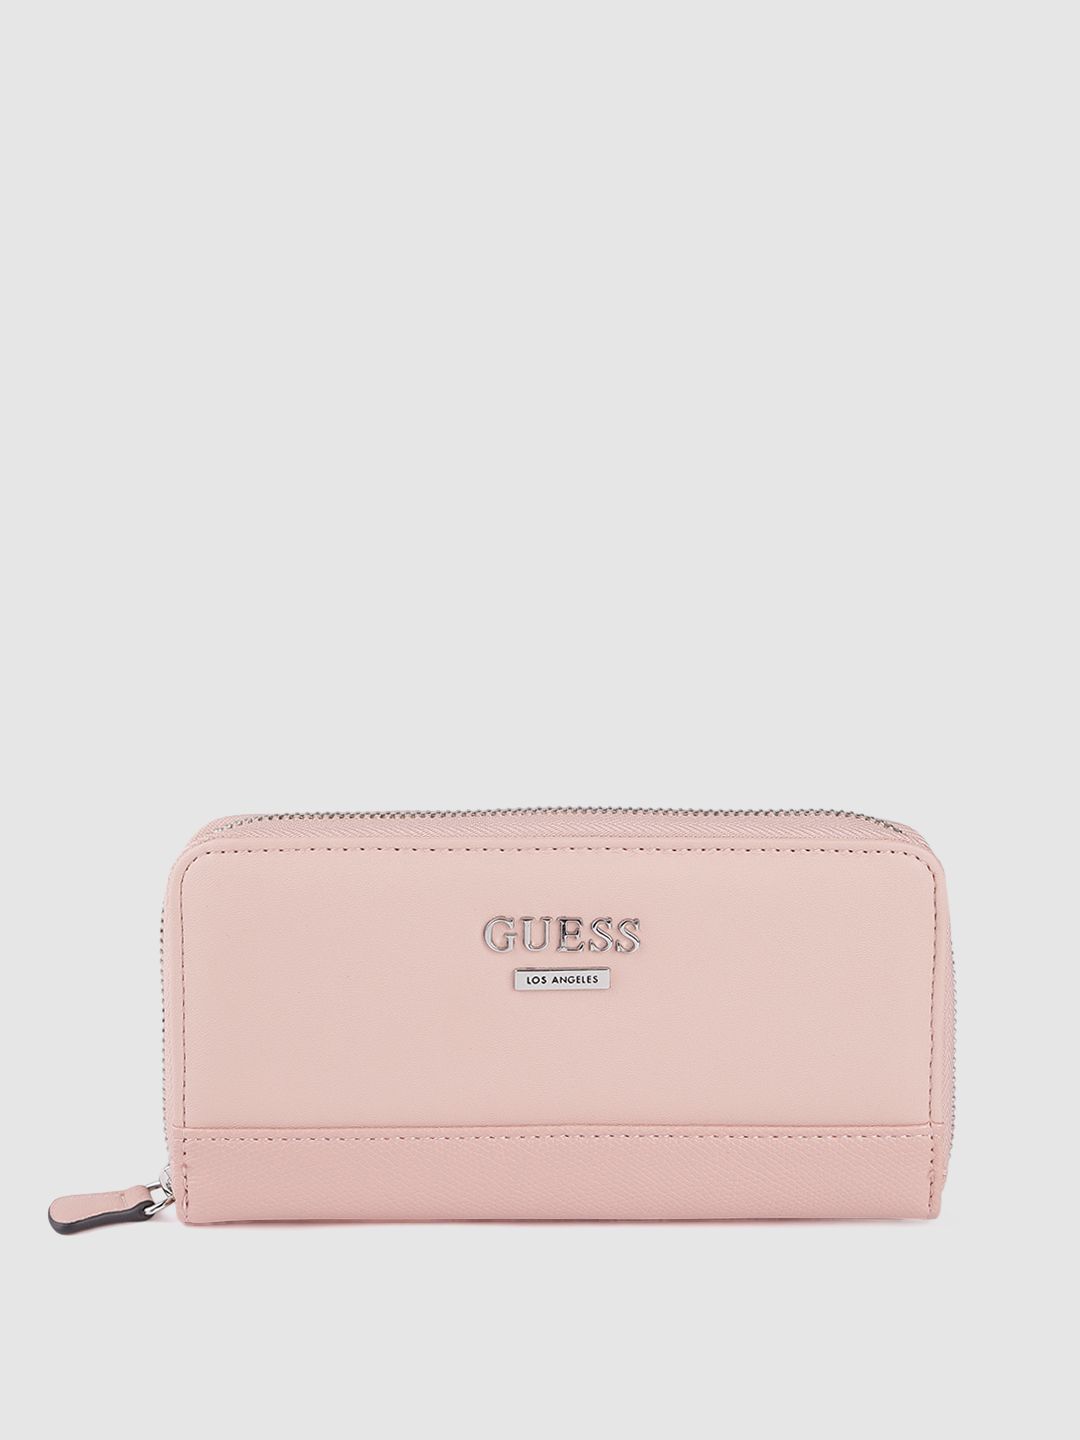 GUESS Women Peach-Coloured Solid Zip Around Wallet Price in India